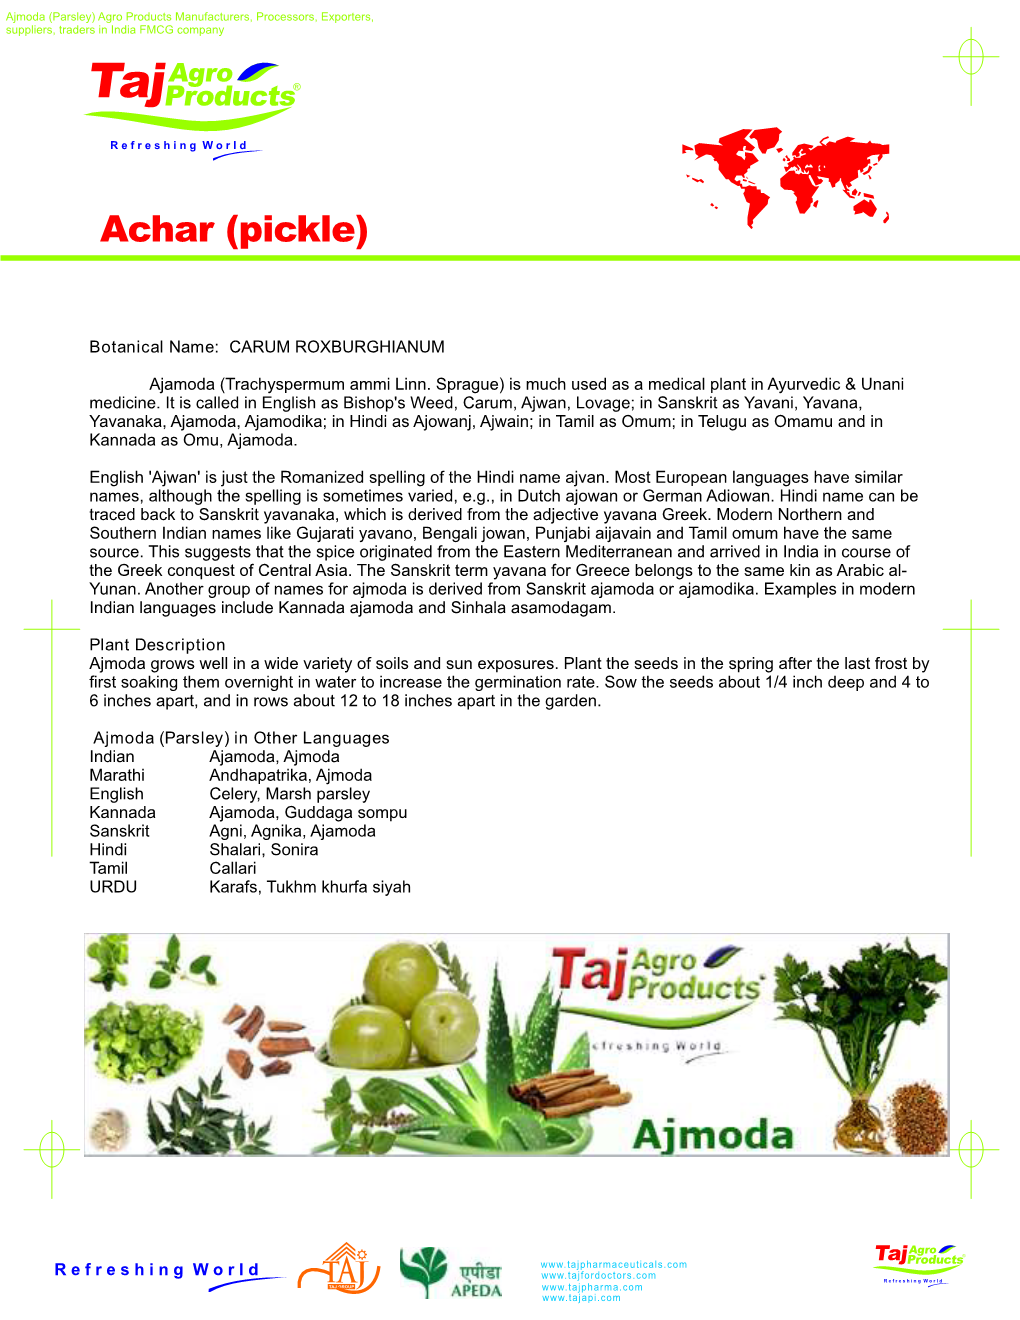 Ajmoda (Parsley) Agro Products Manufacturers, Processors, Exporters, Suppliers, Traders in India FMCG Company Taj Agro Products®